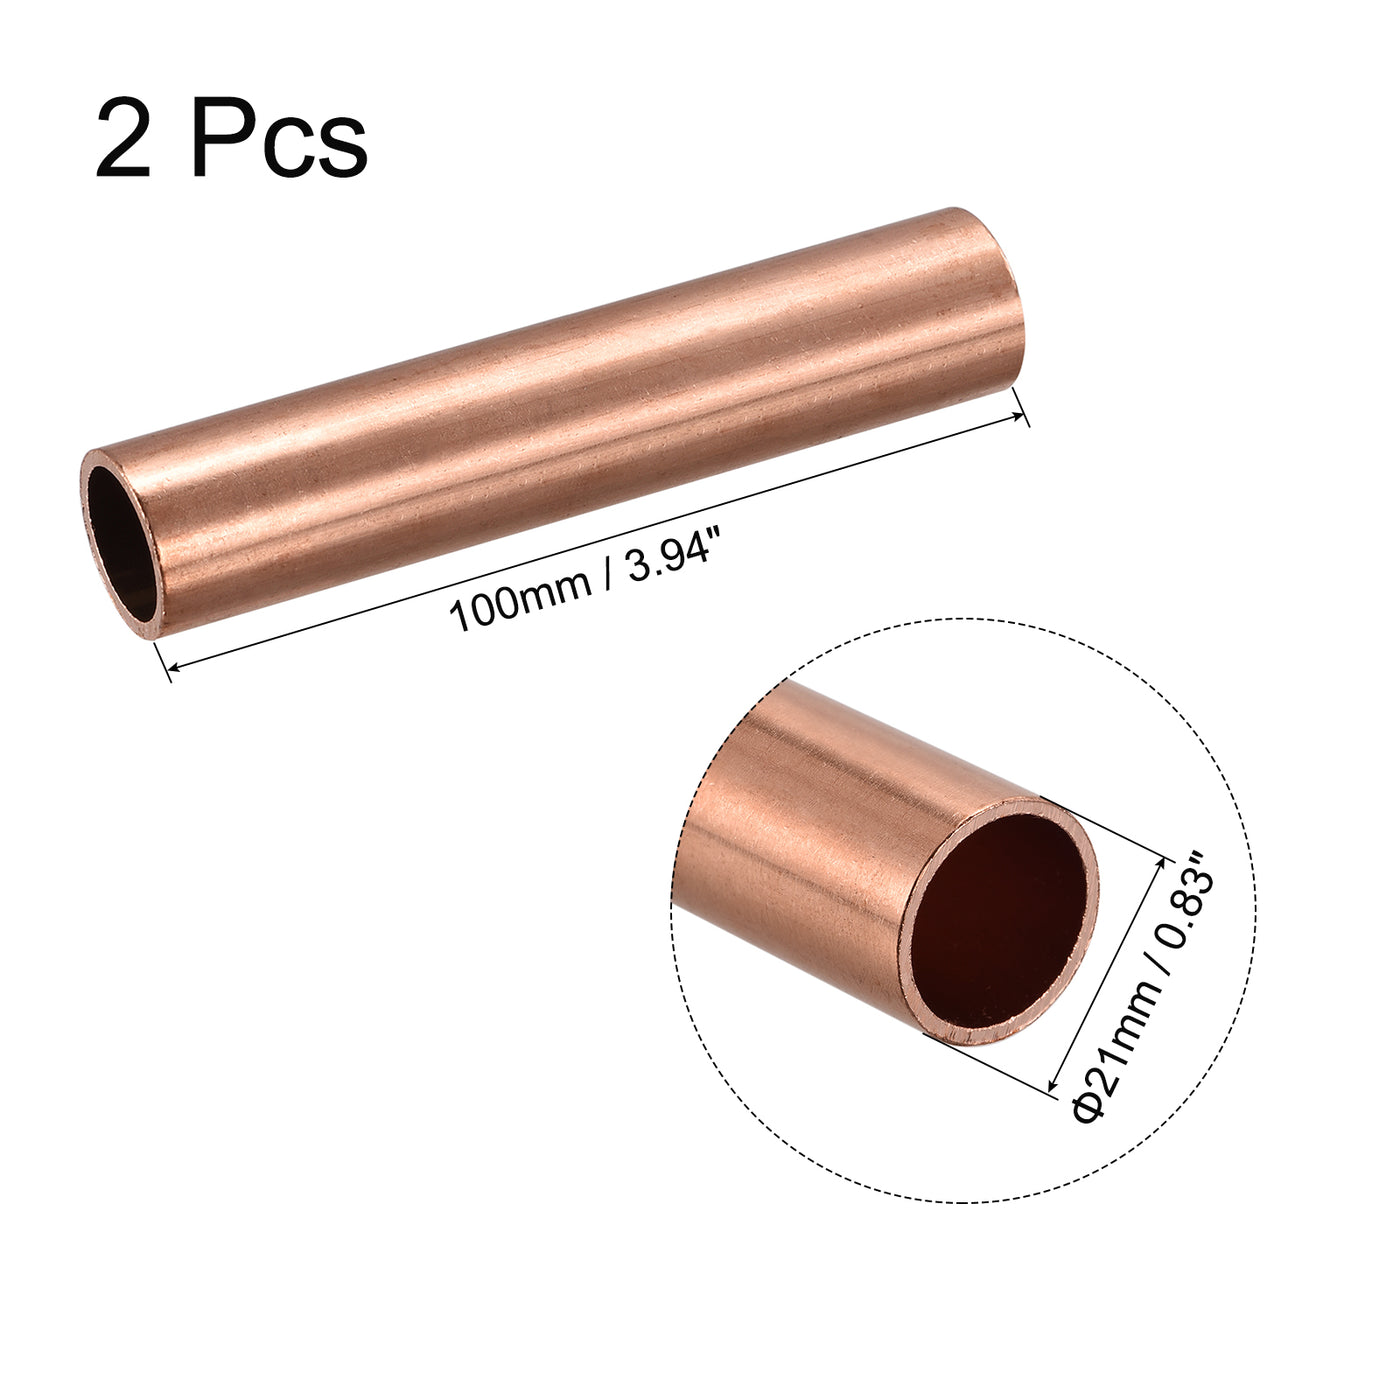 uxcell Uxcell Copper Round Tube 21mm OD 1.5mm Wall Thickness 100mm Length Pipe Tubing 2 Pcs